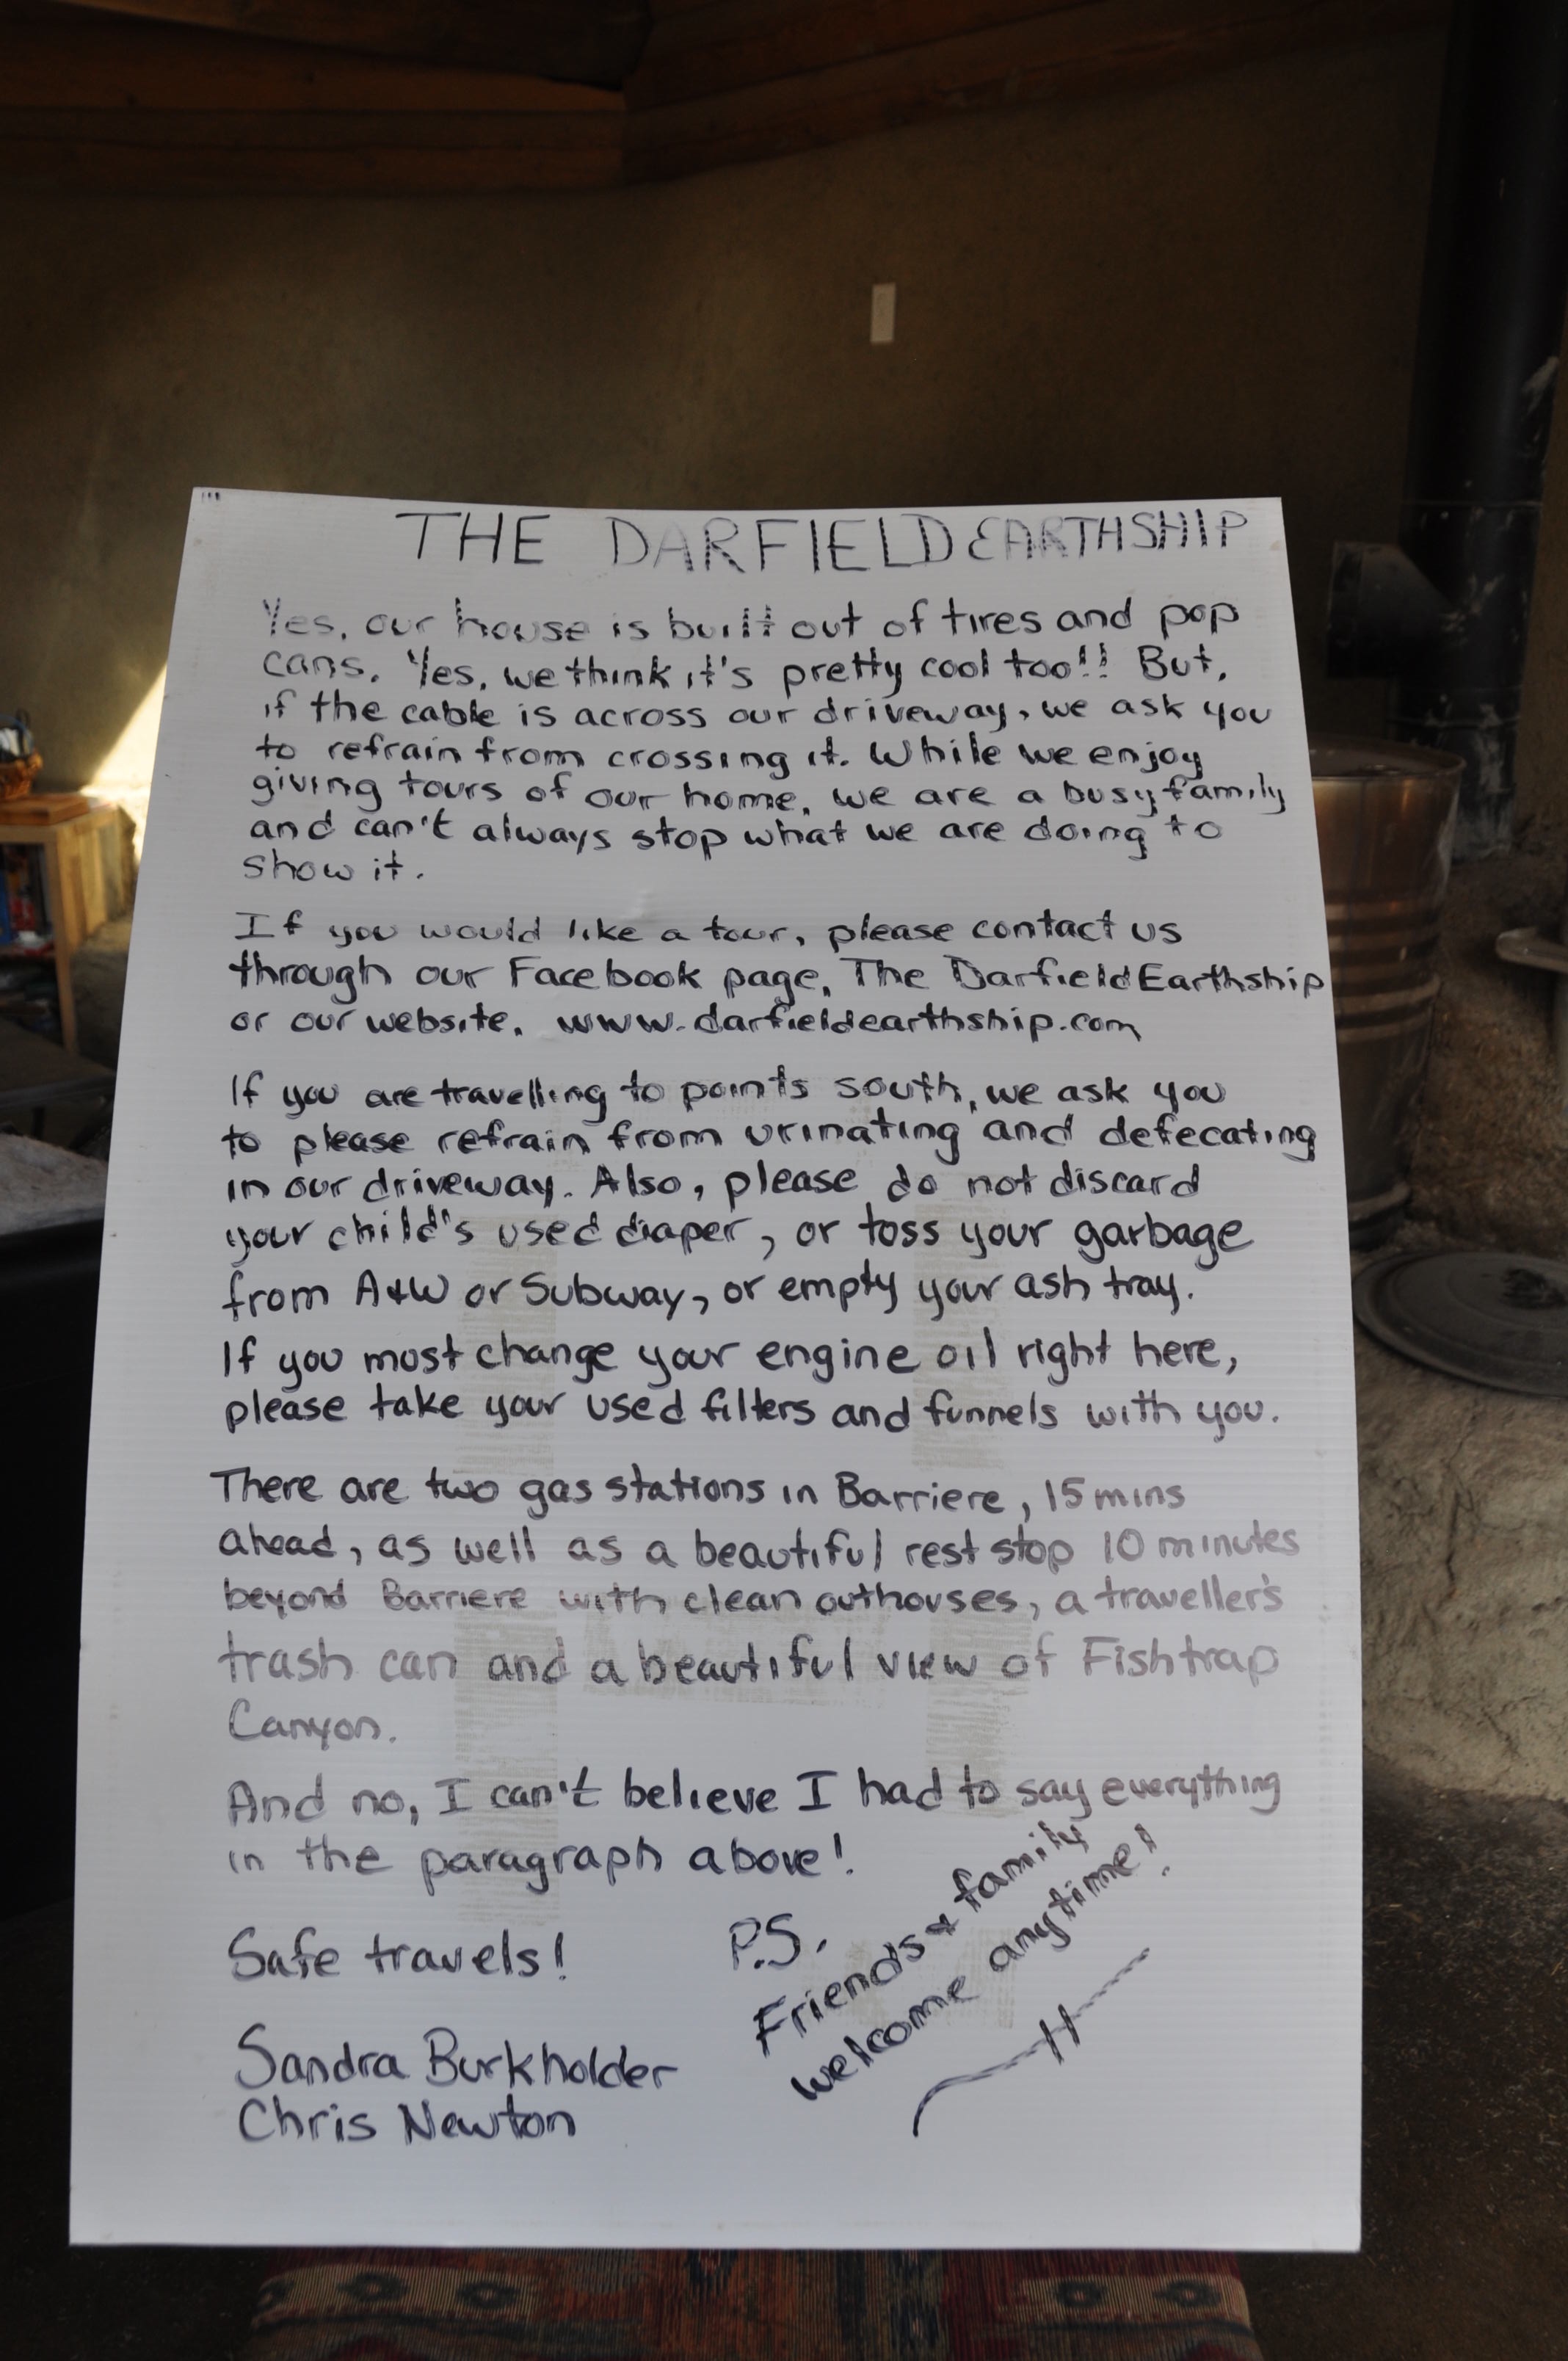 The social niceties of earthship tours